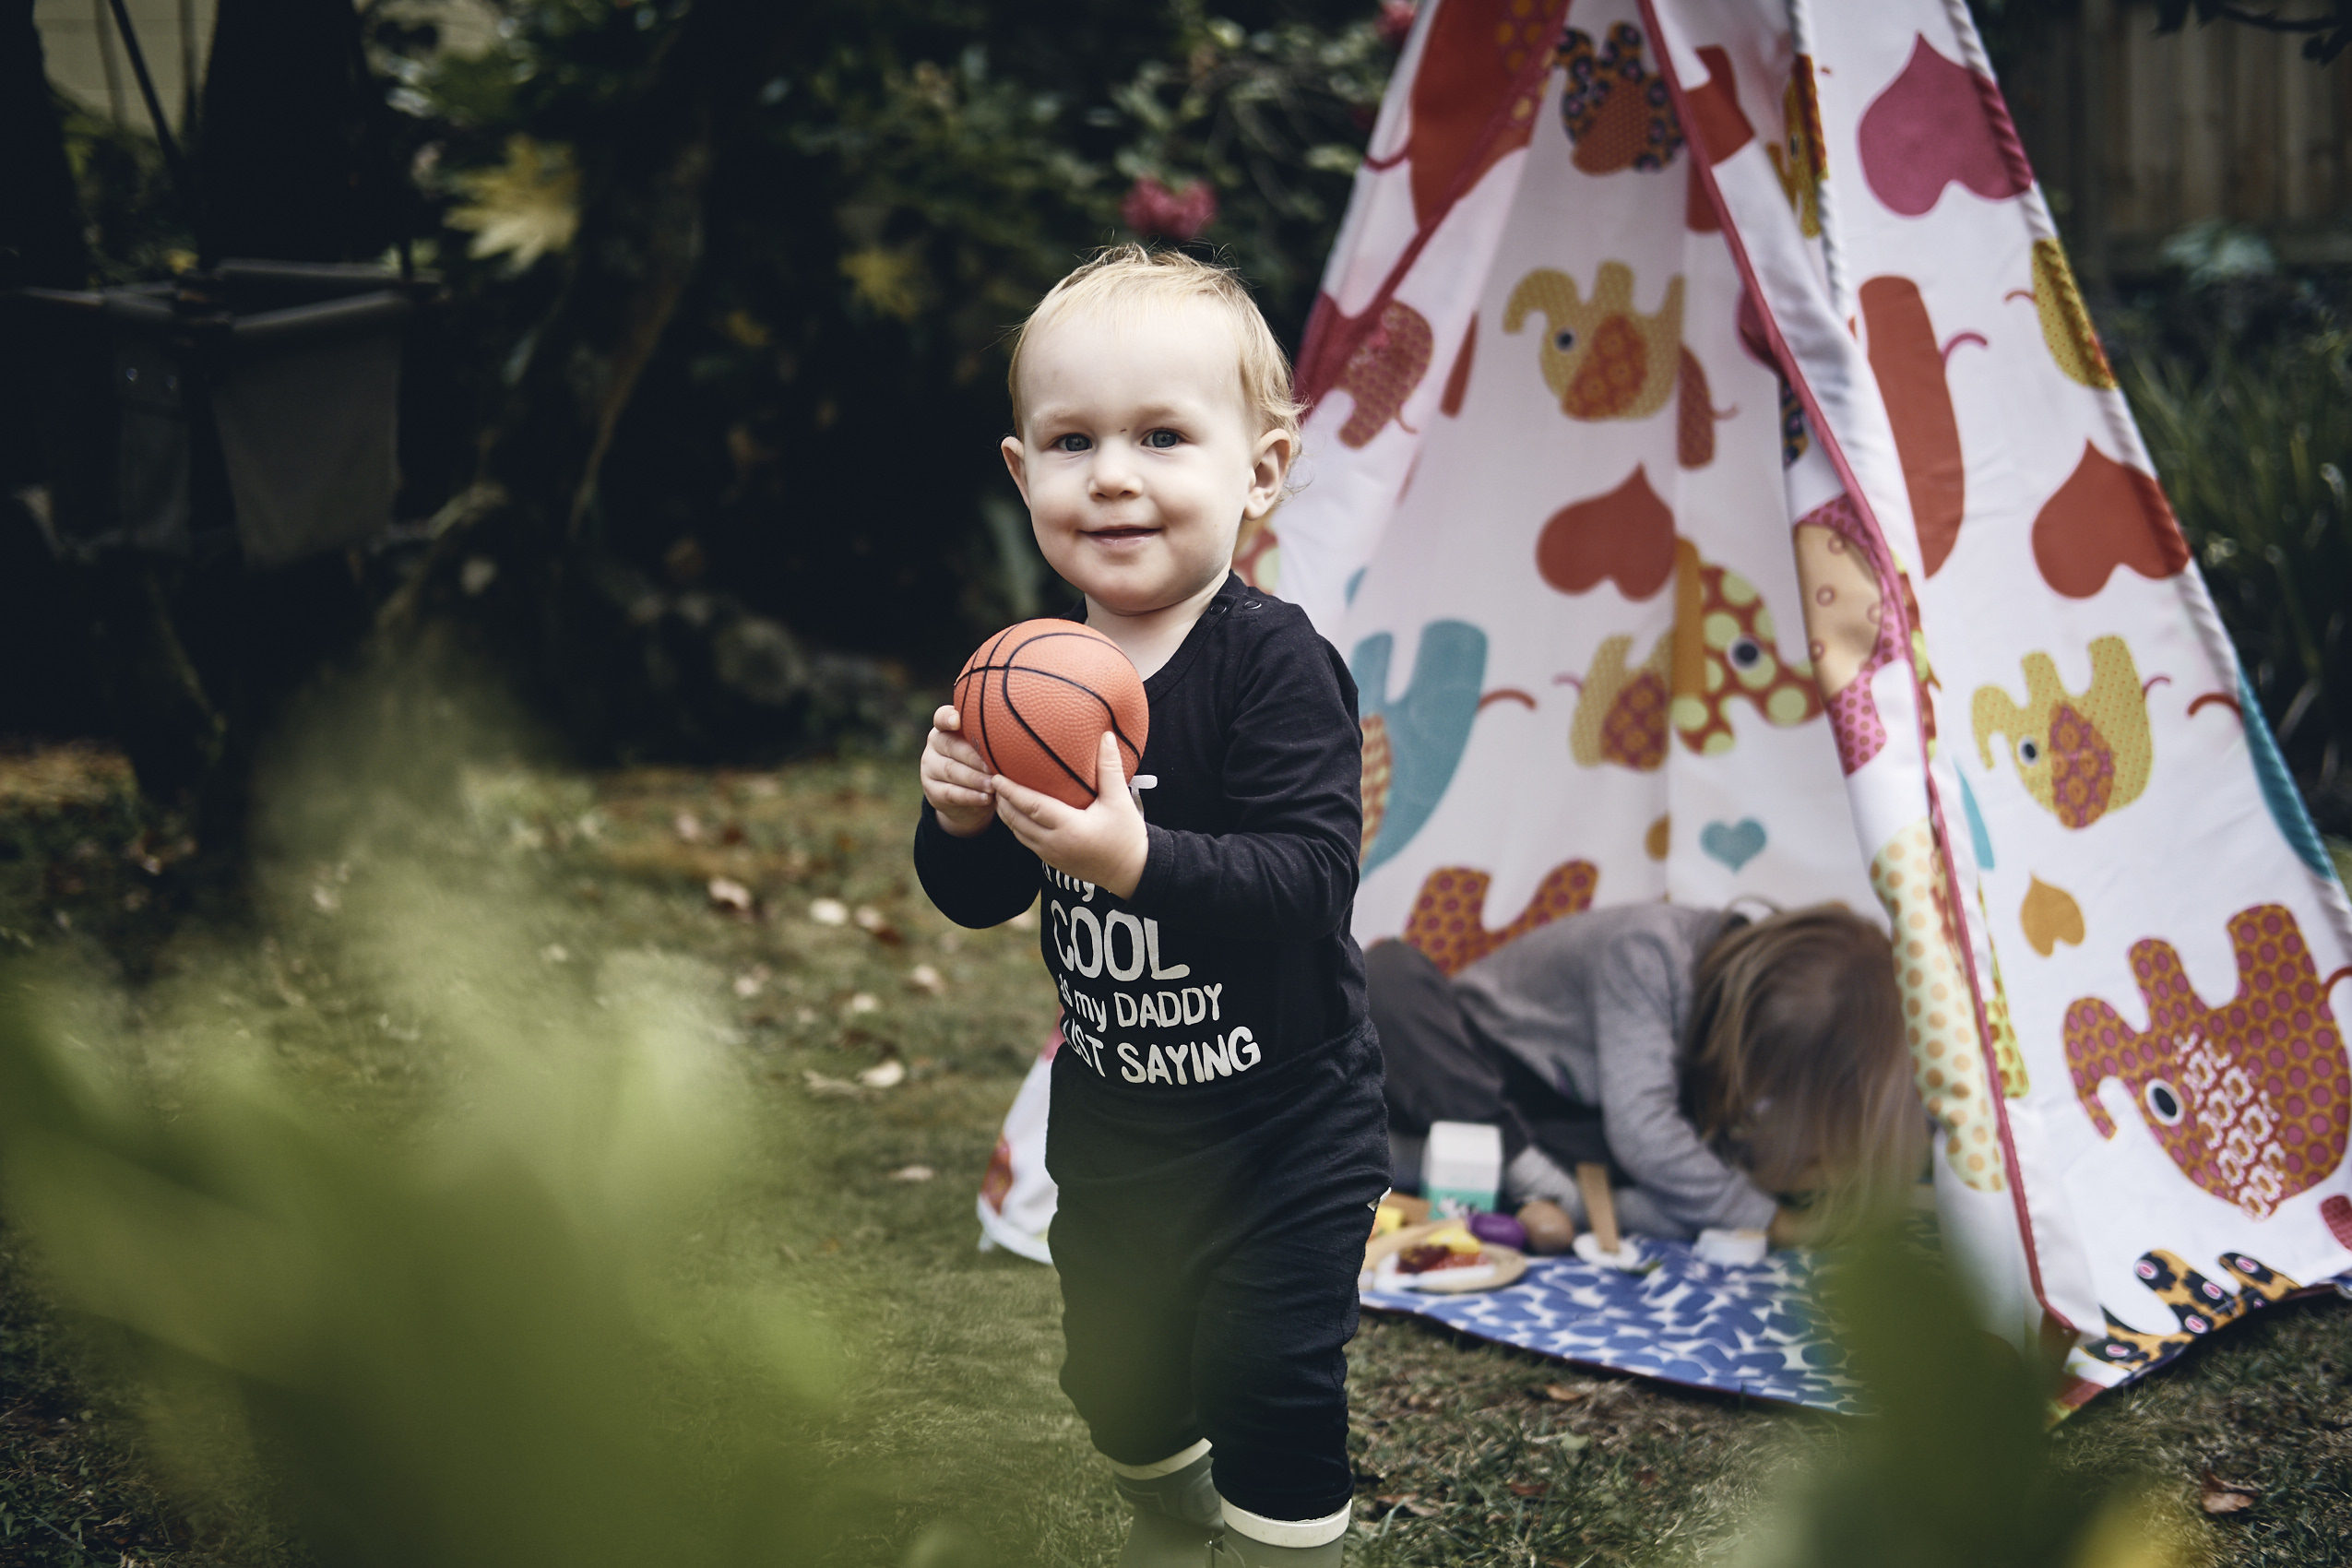 Lockdown • Little Boy Playing with Soft Basketball in Garden • Lifestyle & Portrait Photography